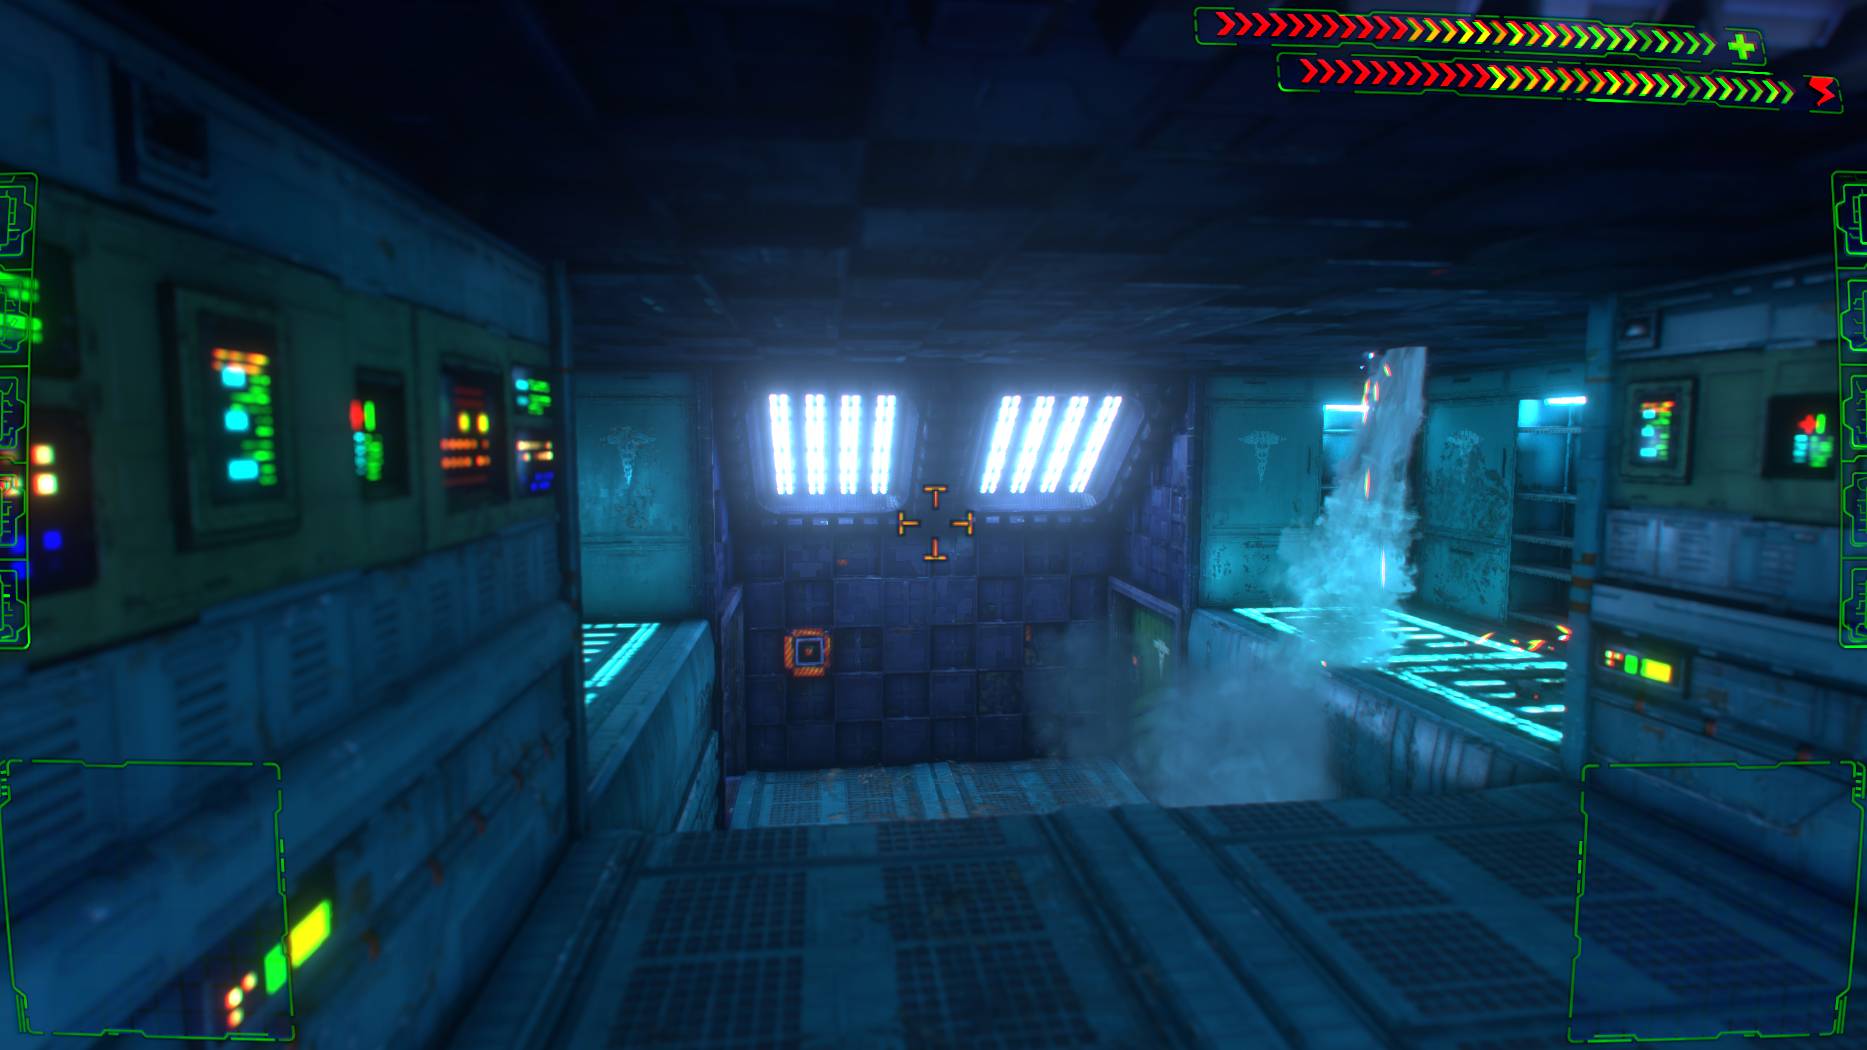 SystemSHock3